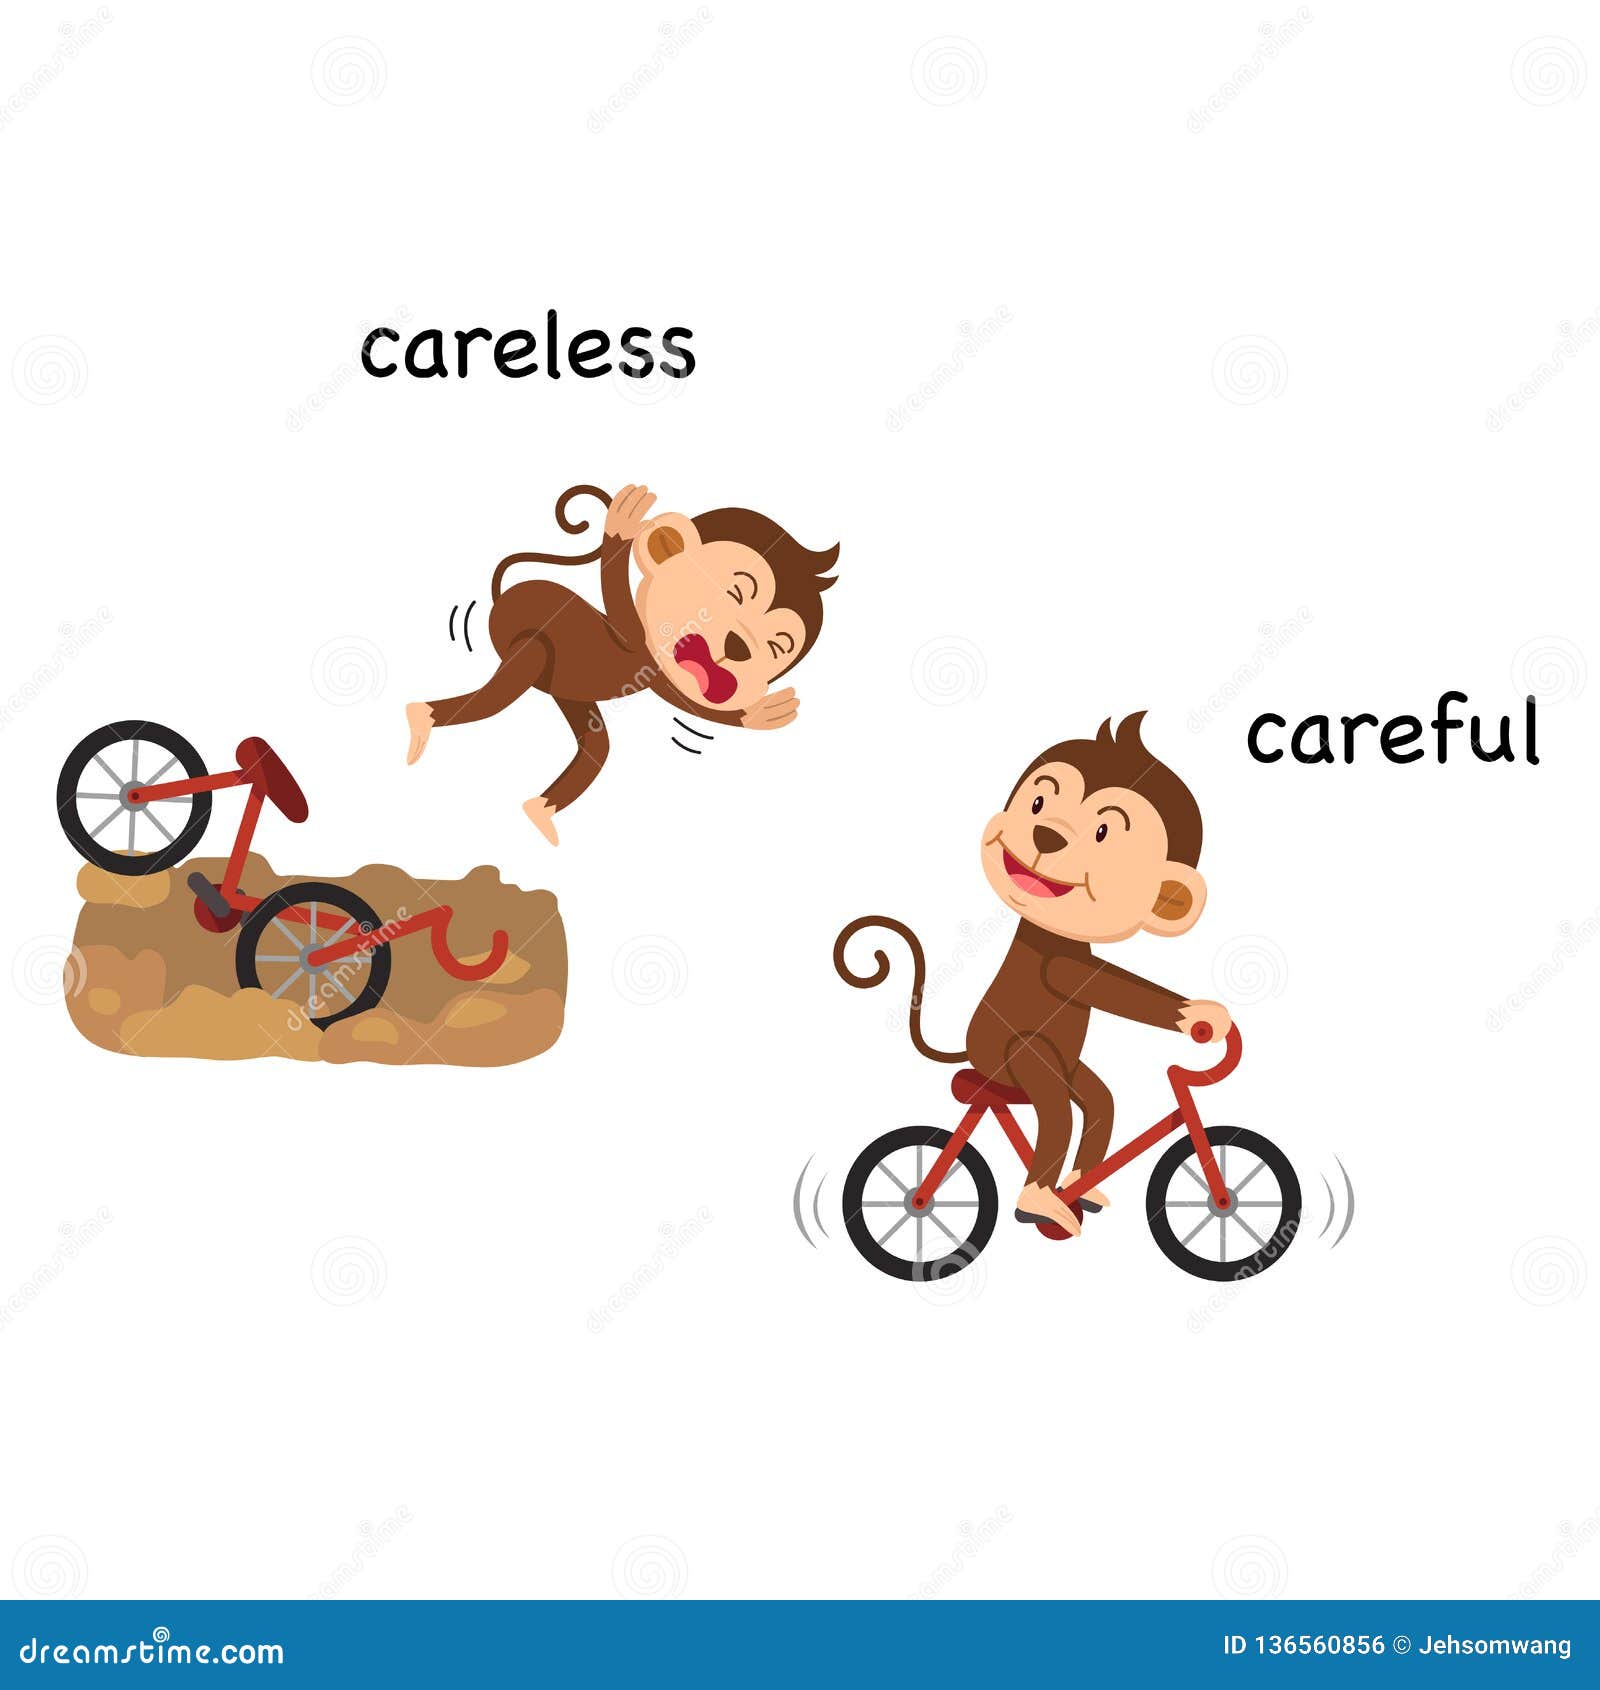 careless people clipart to print